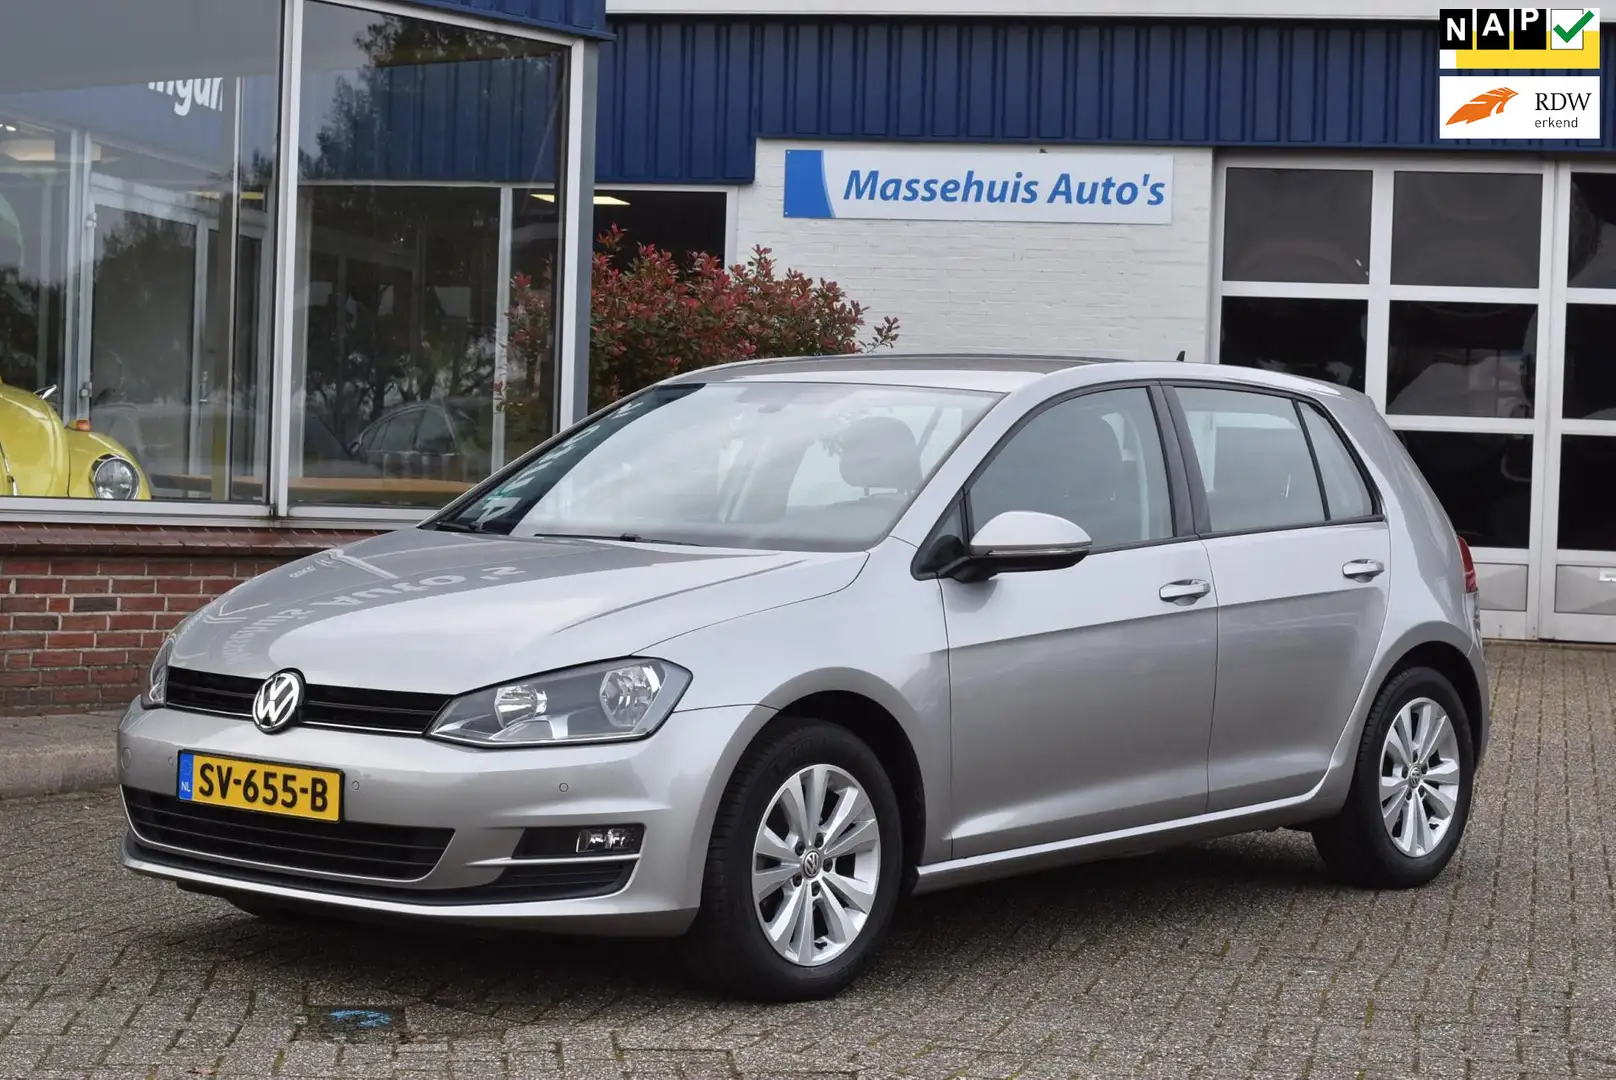 Volkswagen Golf 1.2 TSI Connected Series 65dkm App-connect PDC V+A siva - 1